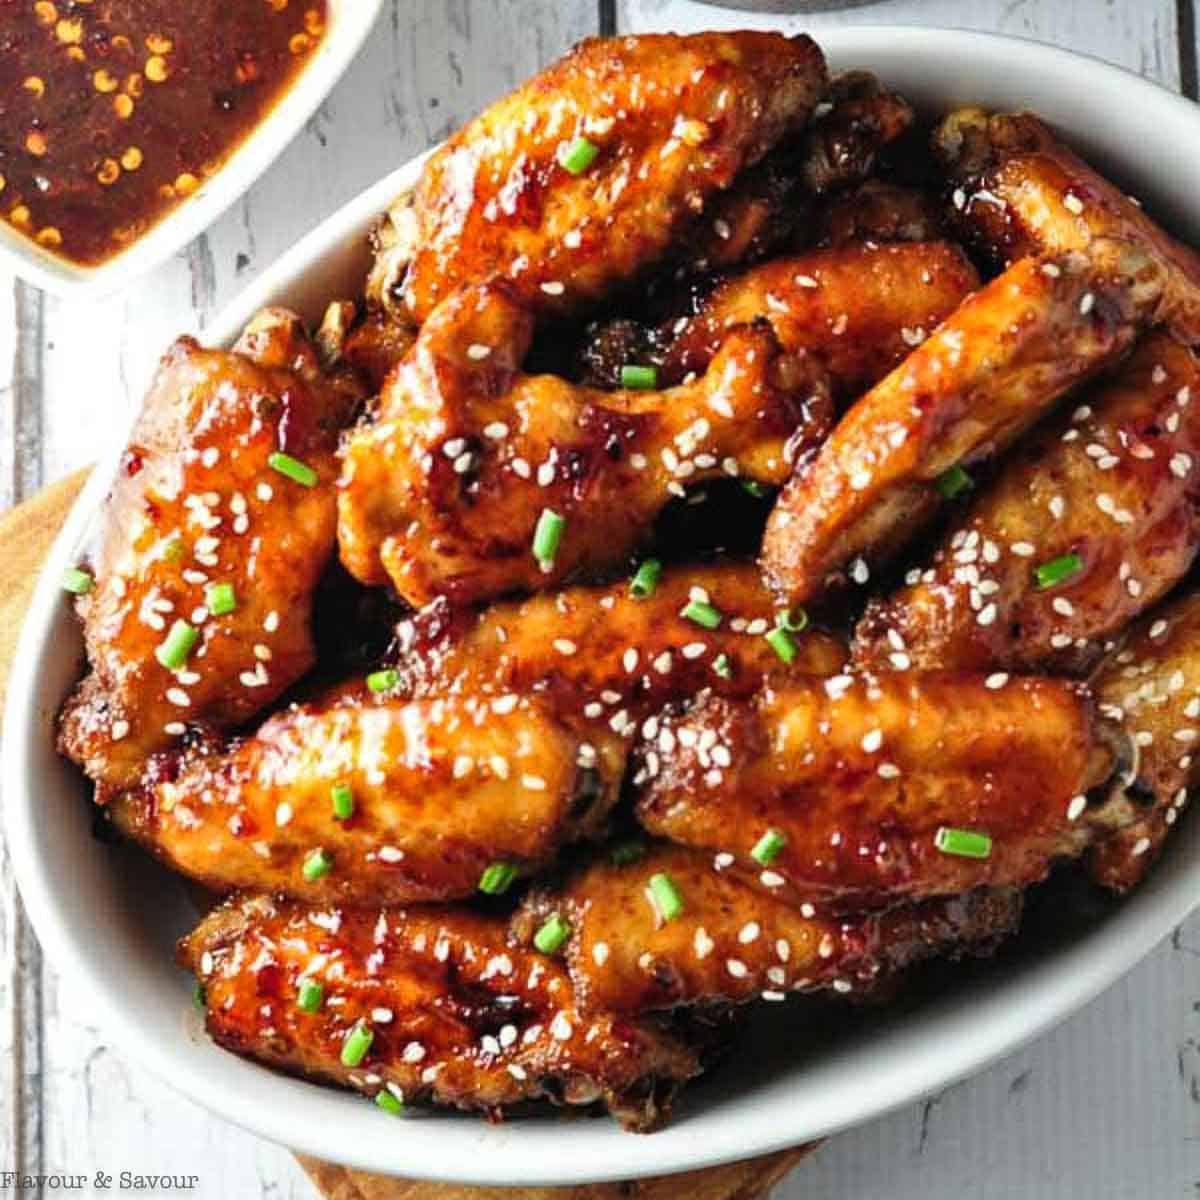 Chipotle Honey-Mustard Chicken Wings - Flavour and Savour